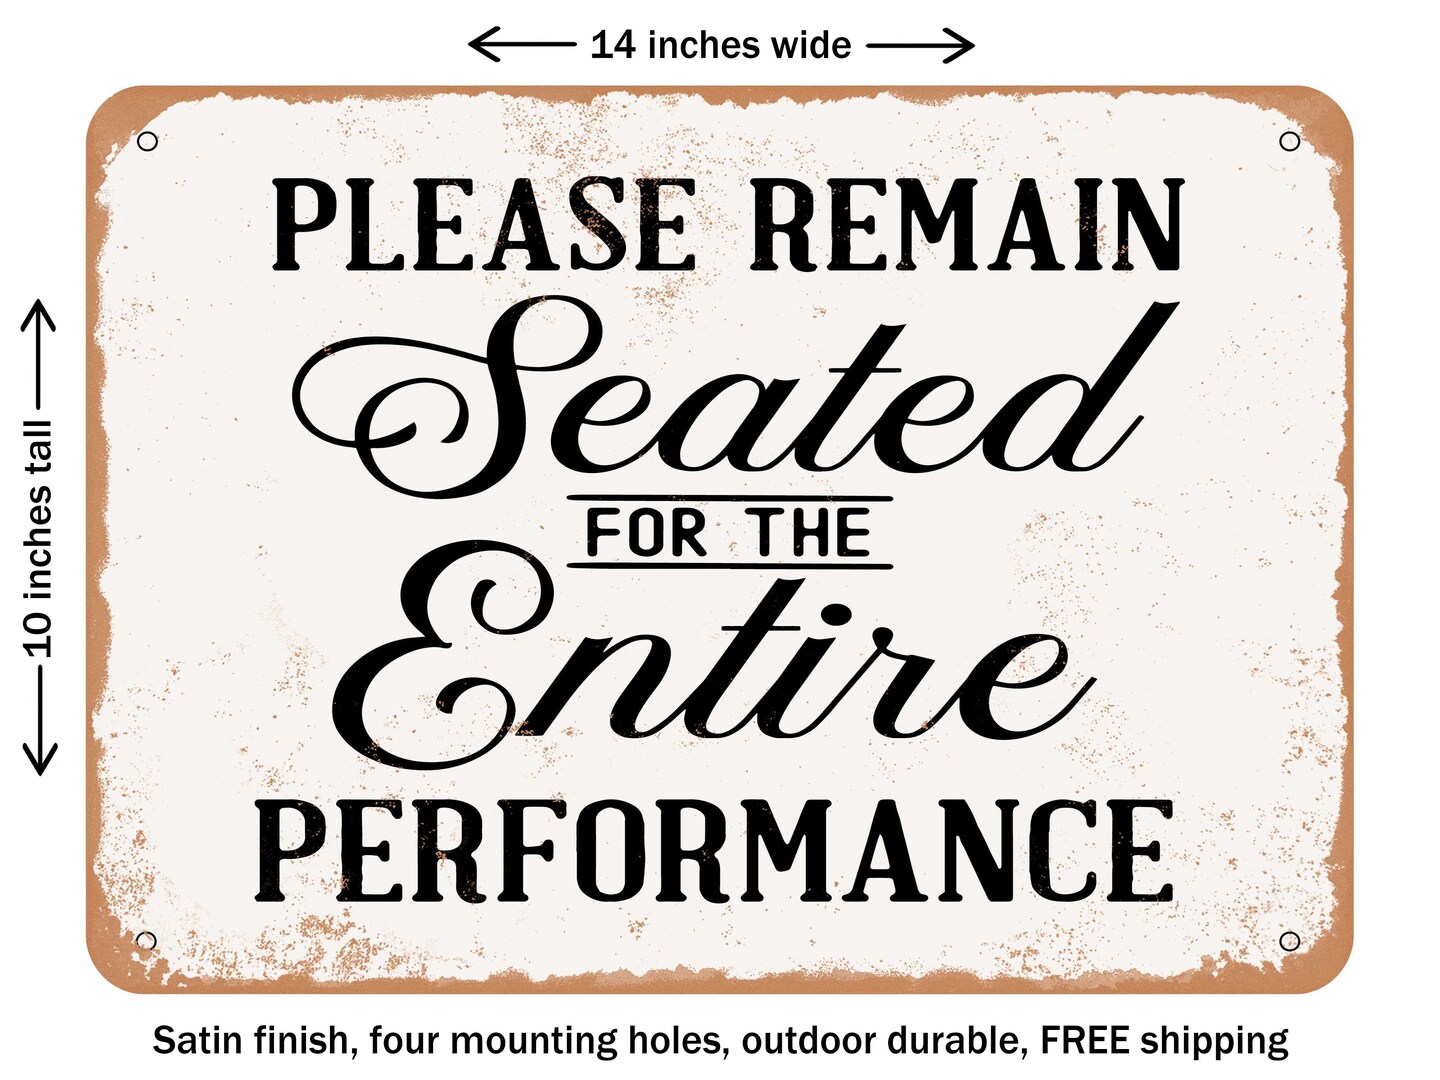 DECORATIVE METAL SIGN - Please Remain Seated For the Entire Performance - Vintage Rusty Look